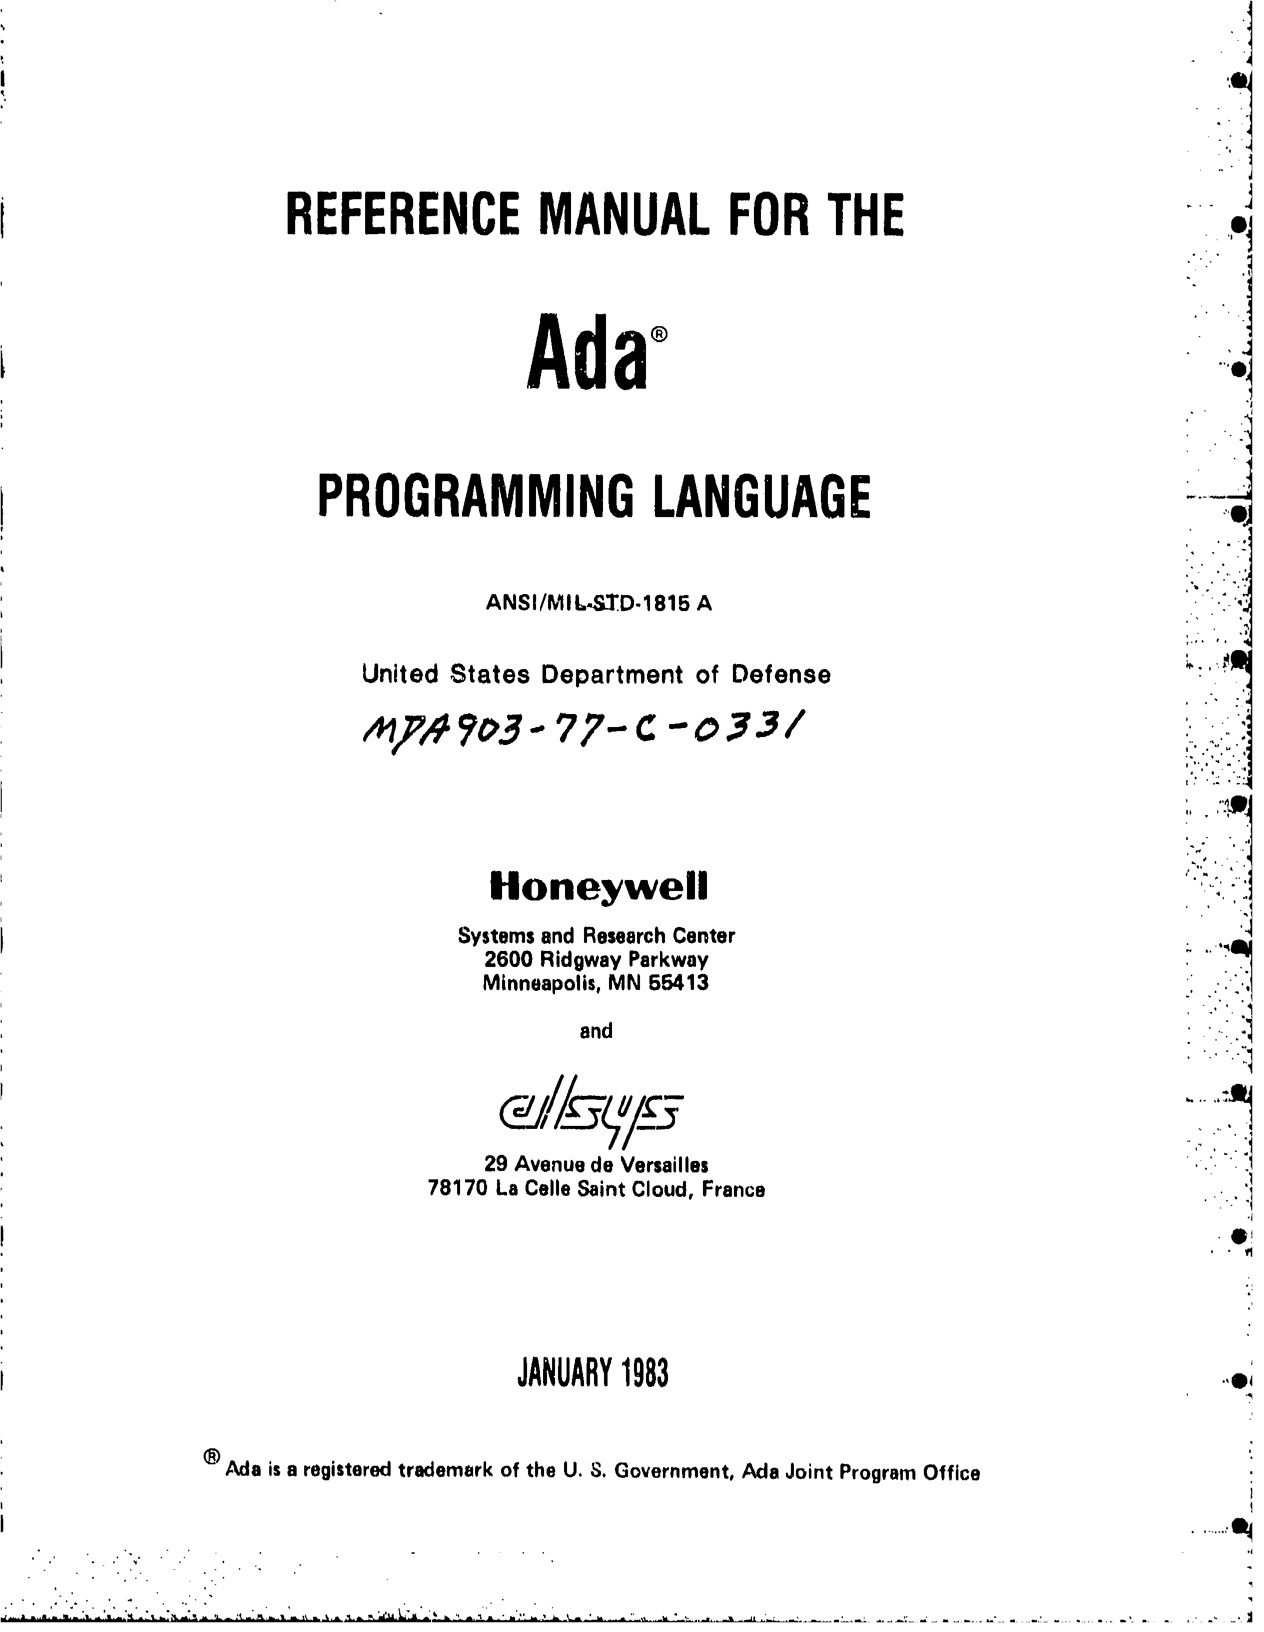 January 1983 — ANSI/MIL-STD-1815 A Reference Manual for the Ada 83 programming language